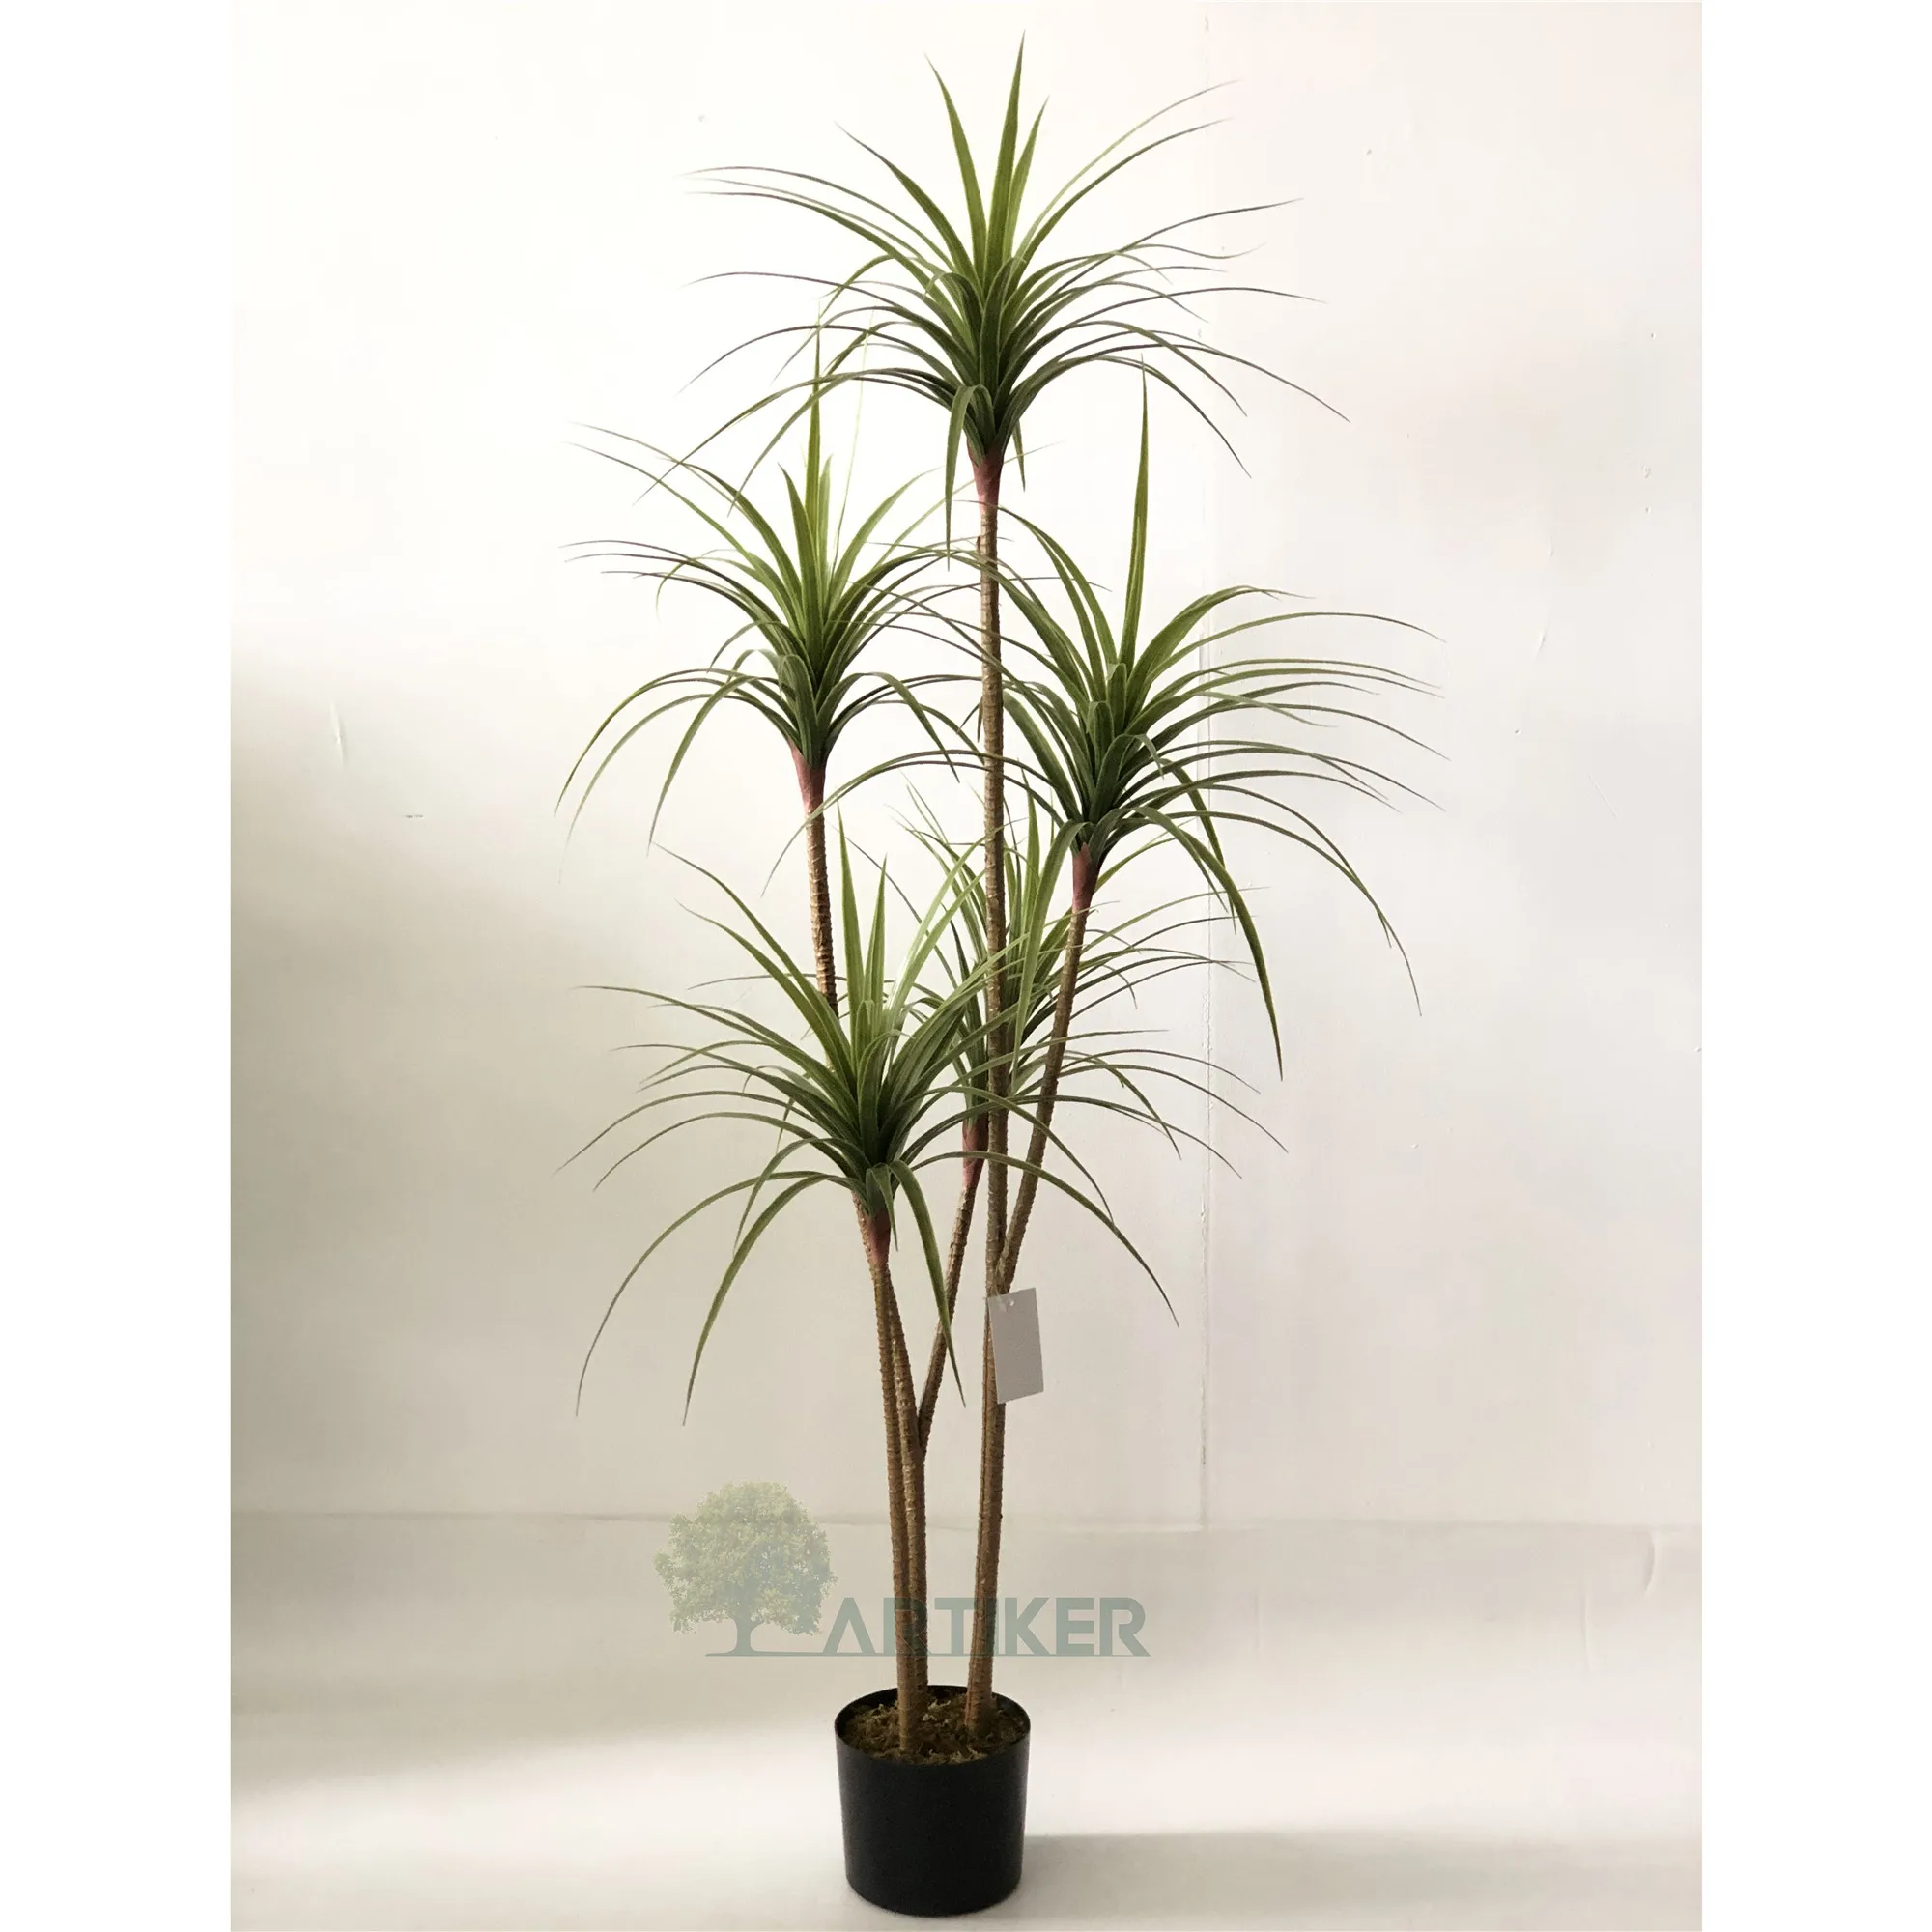 

wholesale home indoor decoration cheap Yucca artificial palm evergreen iron bonsai potted plant tree, Natural color